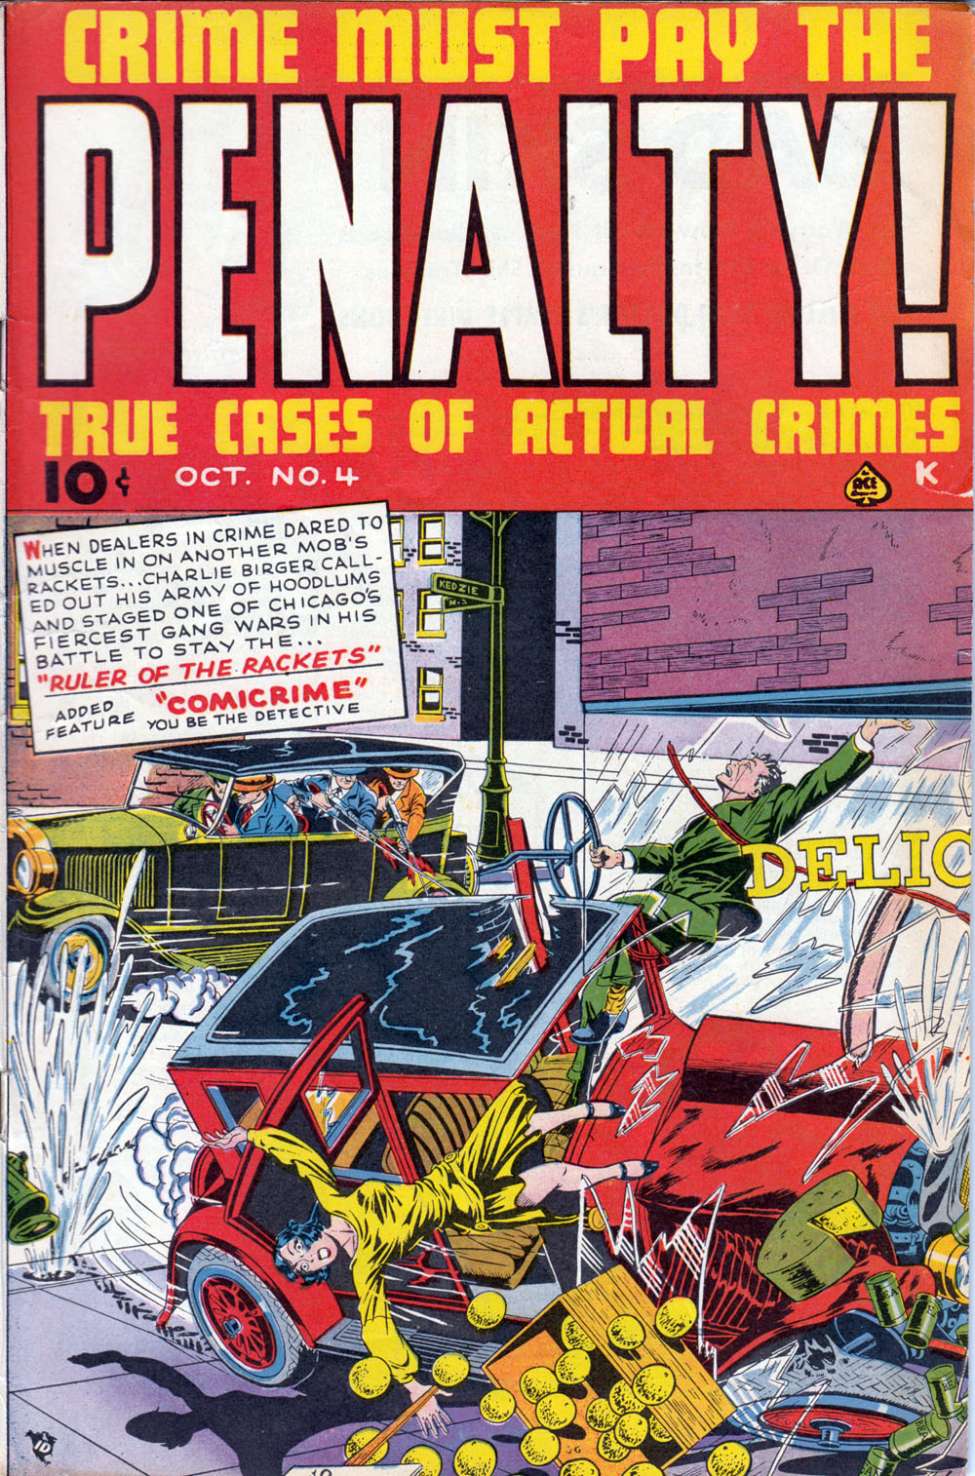 Book Cover For Crime Must Pay the Penalty 4